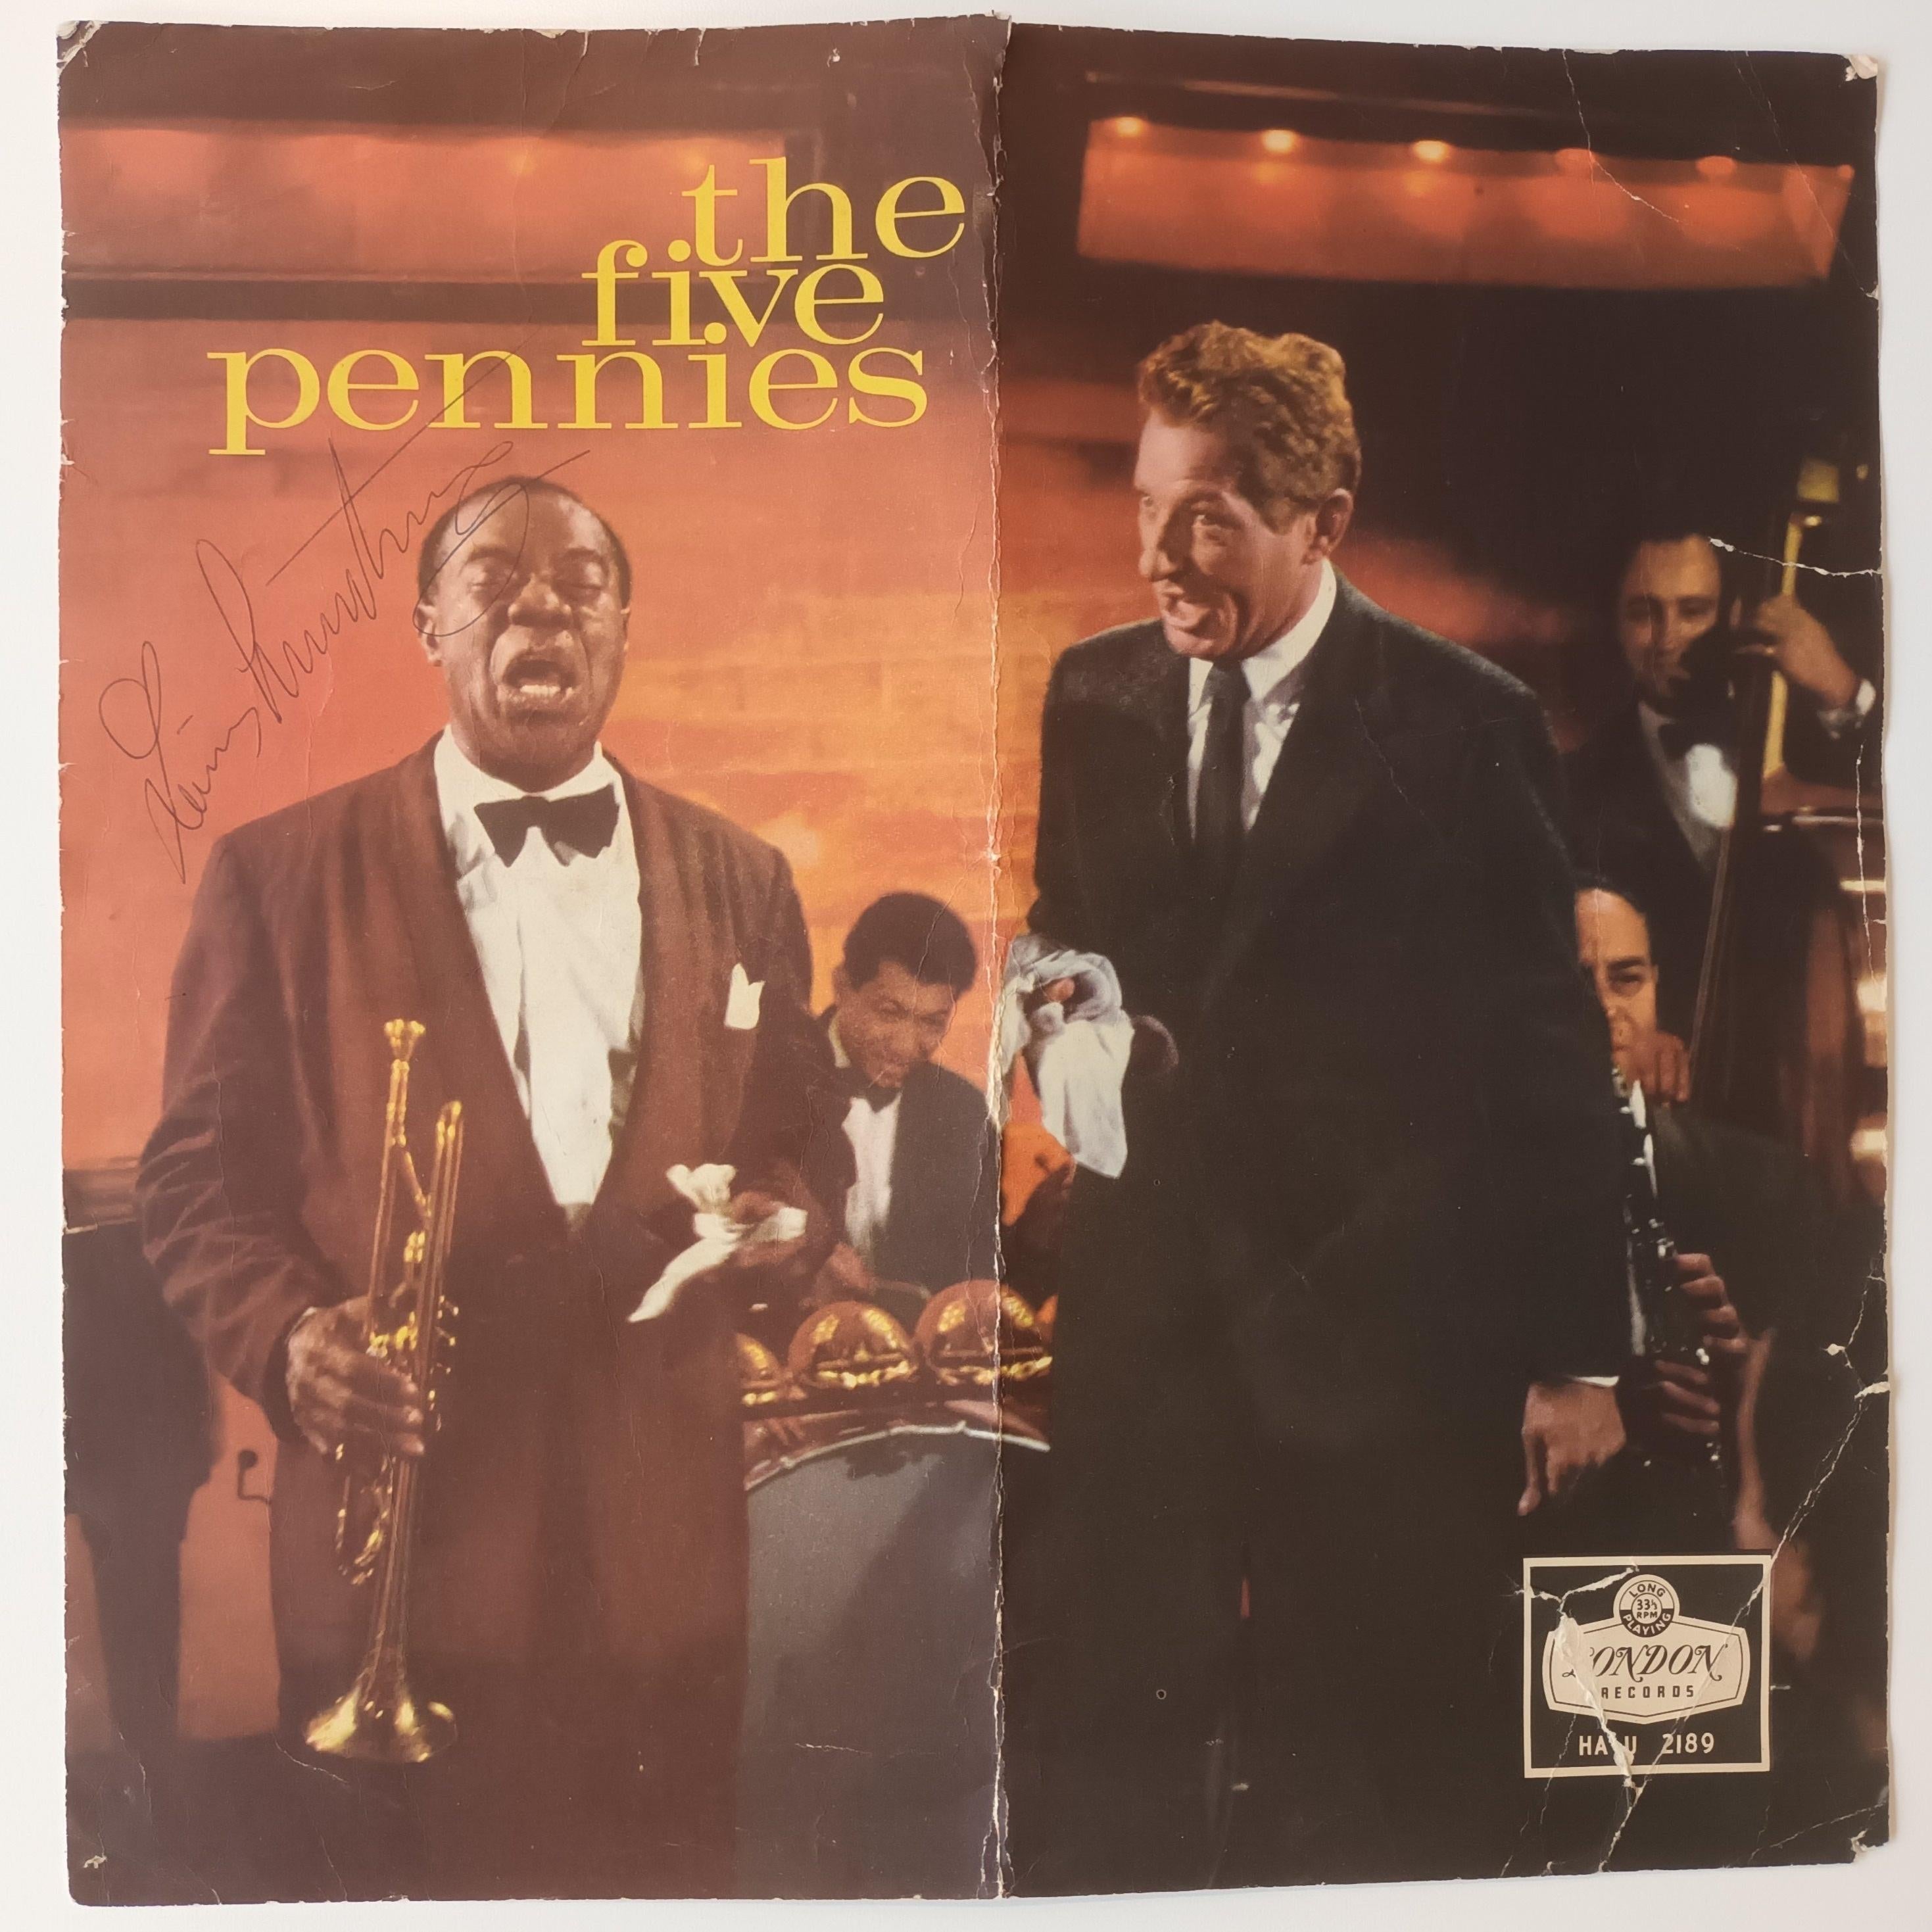 A superb Louis Armstrong autograph
Featured on a 12 by 12 inch image of Armstrong, alongside actor Danny Kaye, from 1959 film The Five Pennies 

Armstrong has signed his name handsomely in black ink.

The item may have originally been inserted